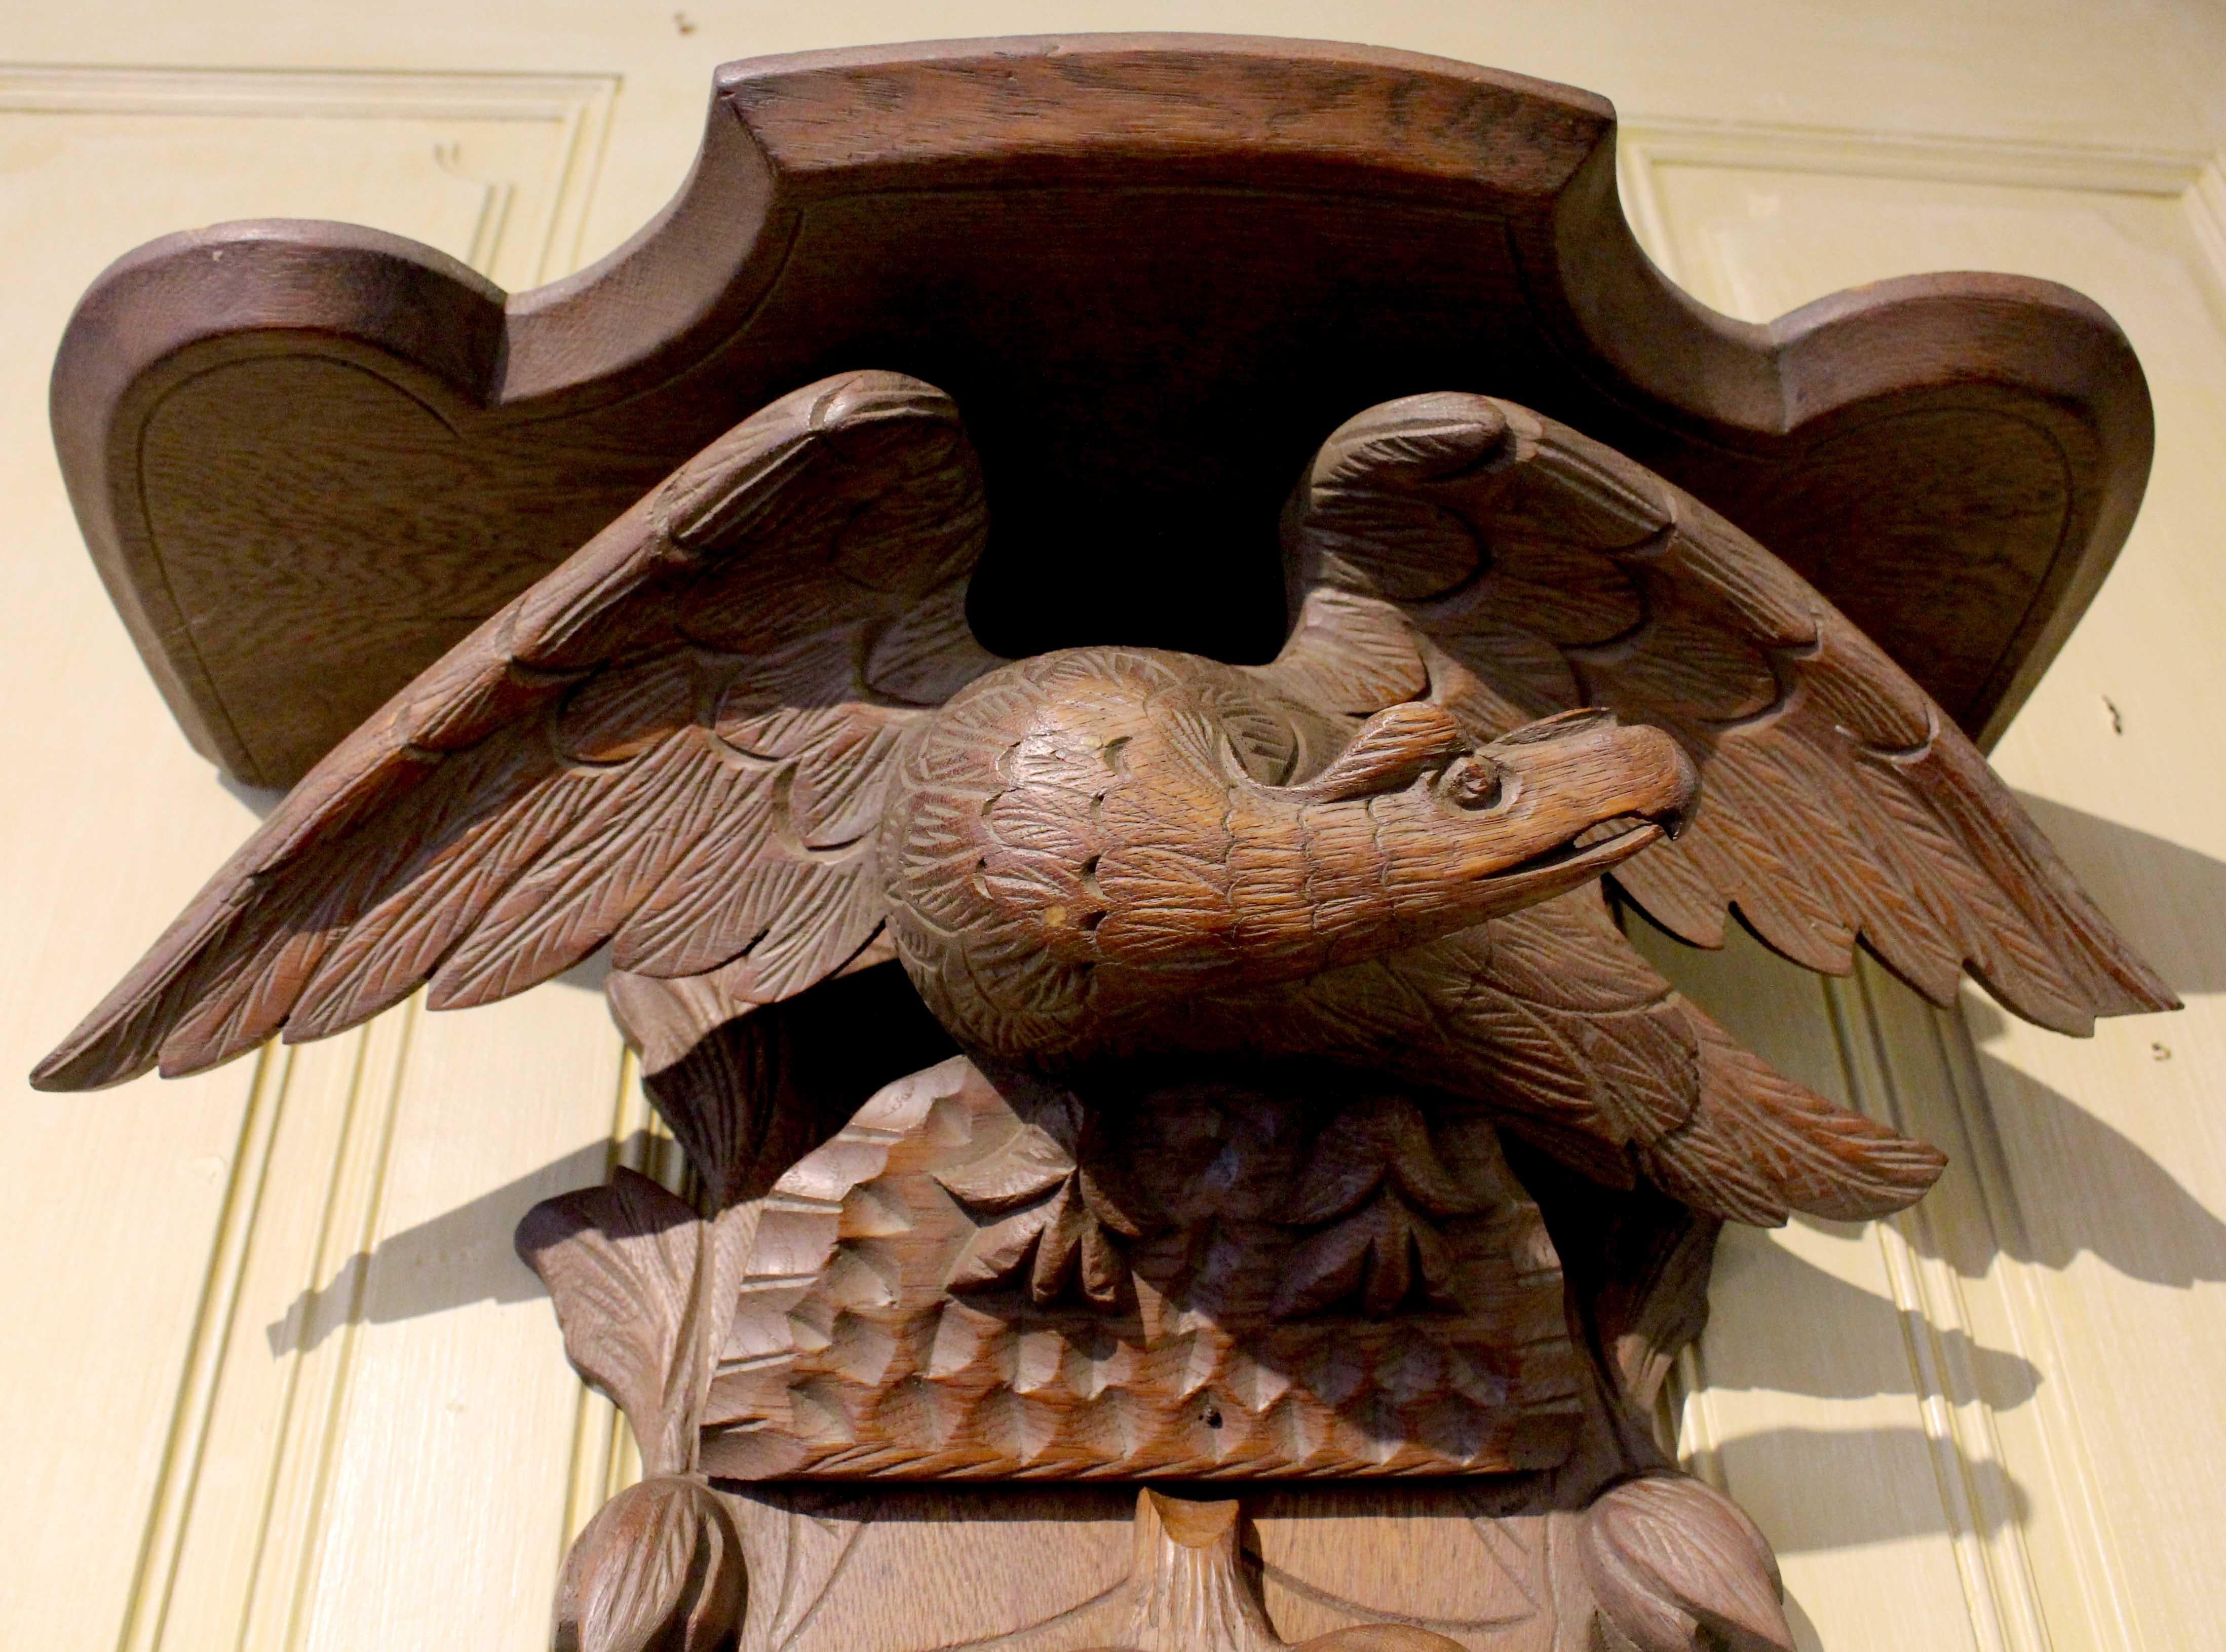 A boldly carved eagle wall shelf, c.1860-80, Black Forest. Carved from linden wood. Beneath the shelf a spread eagle above a festoon of fruits & leaves.
24